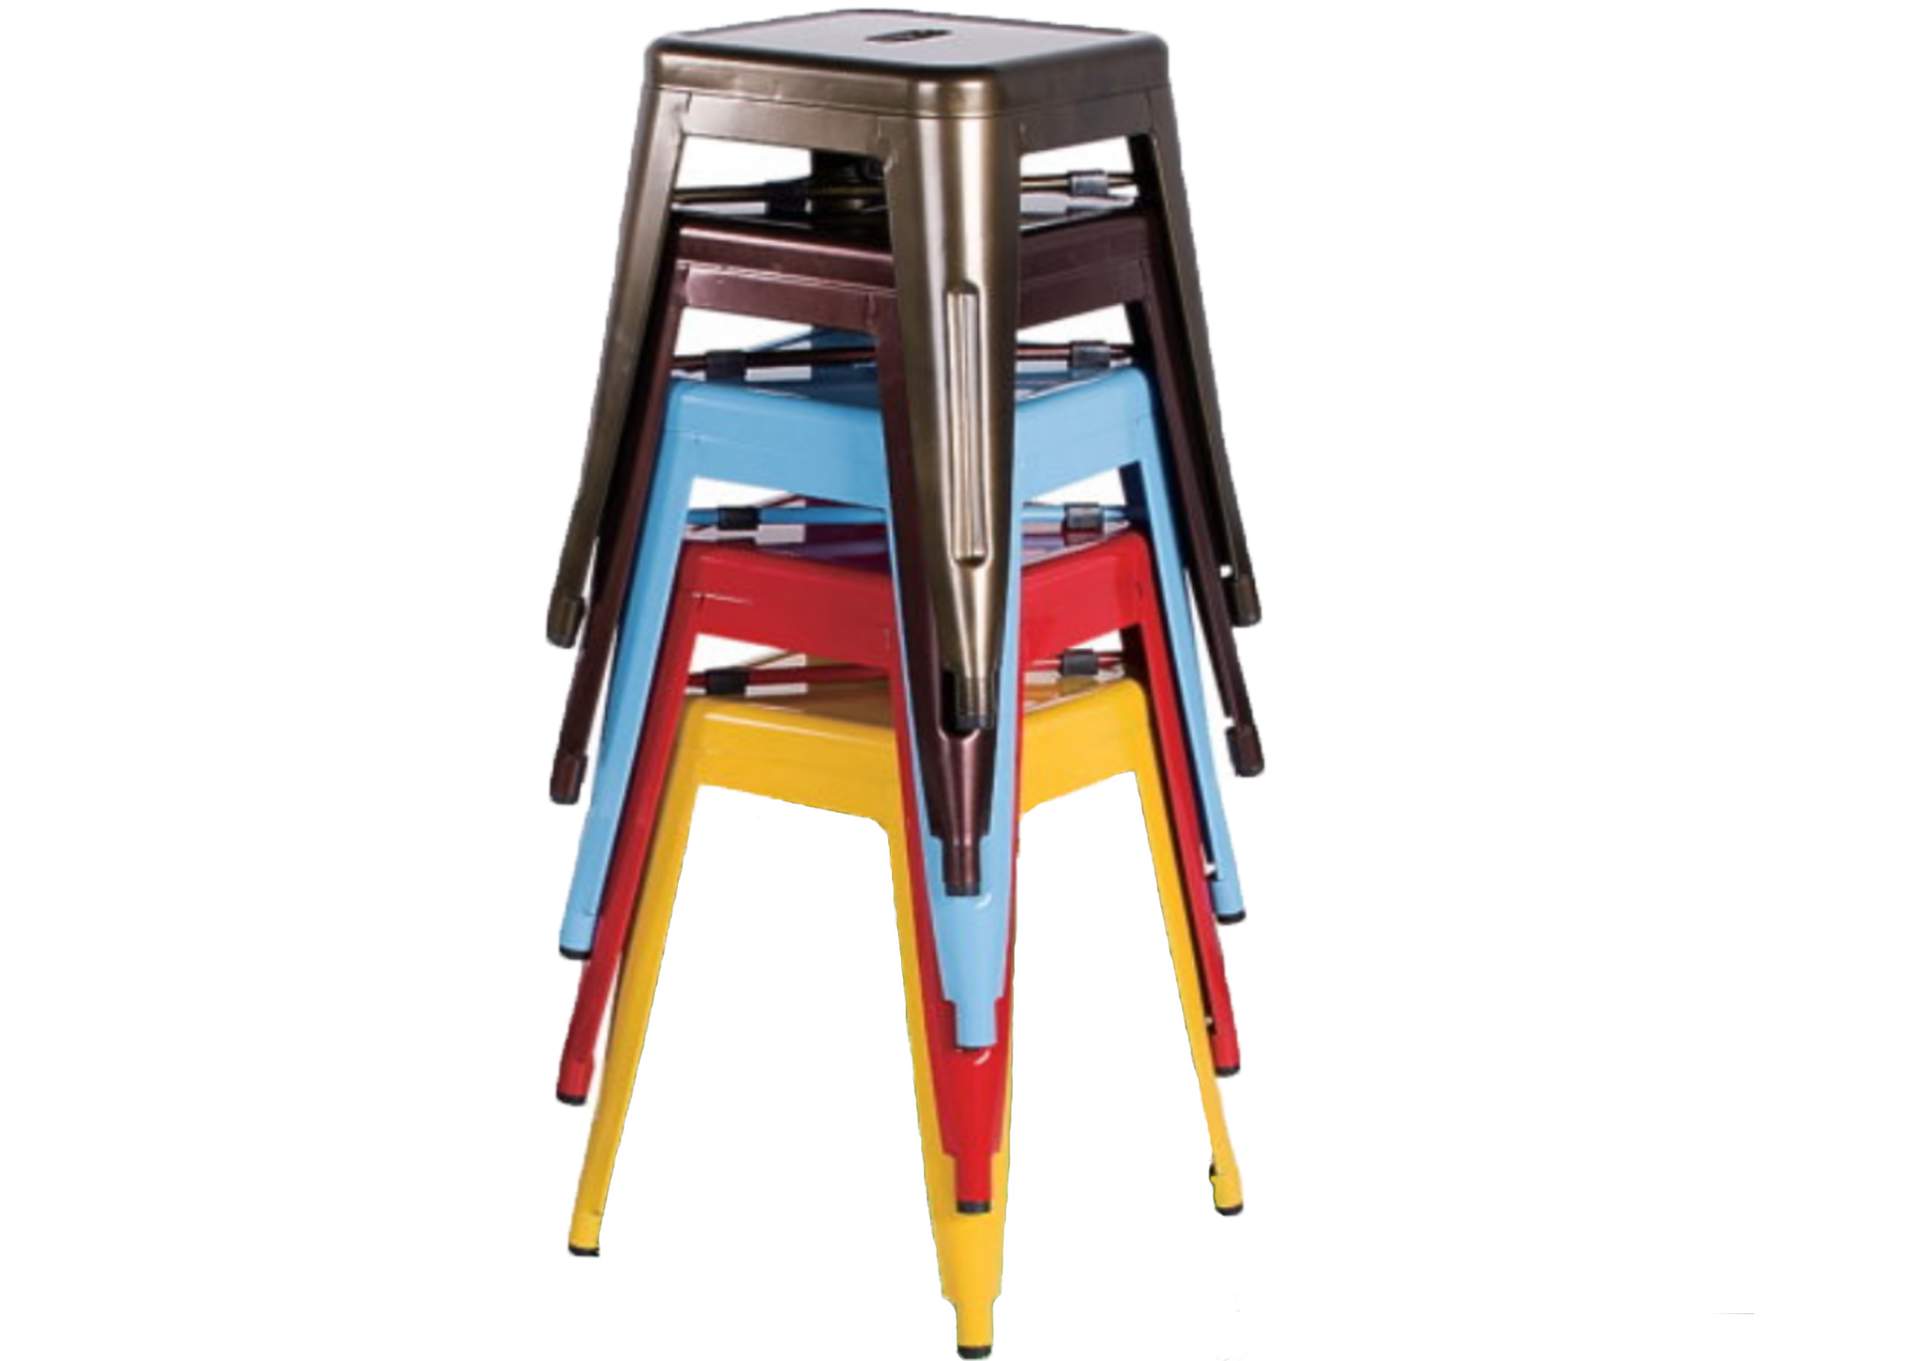 Galvanized Steel Side Chair,Chintaly Imports